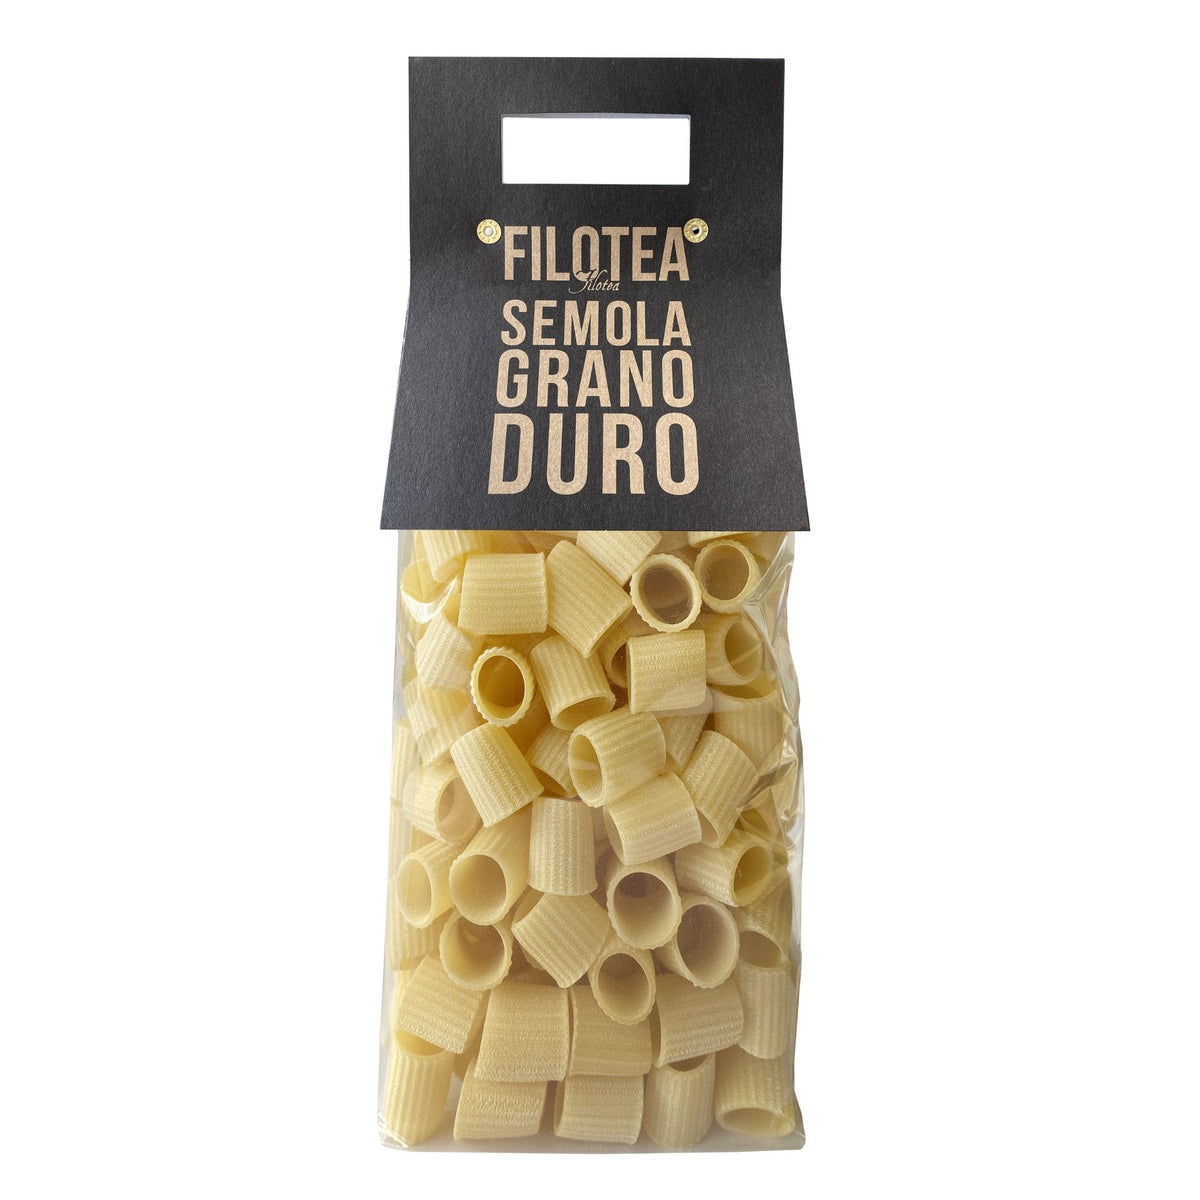 Filotea Mezze Maniche Durum Wheat Pasta 500g  | Imported and distributed in the UK by Just Gourmet Foods